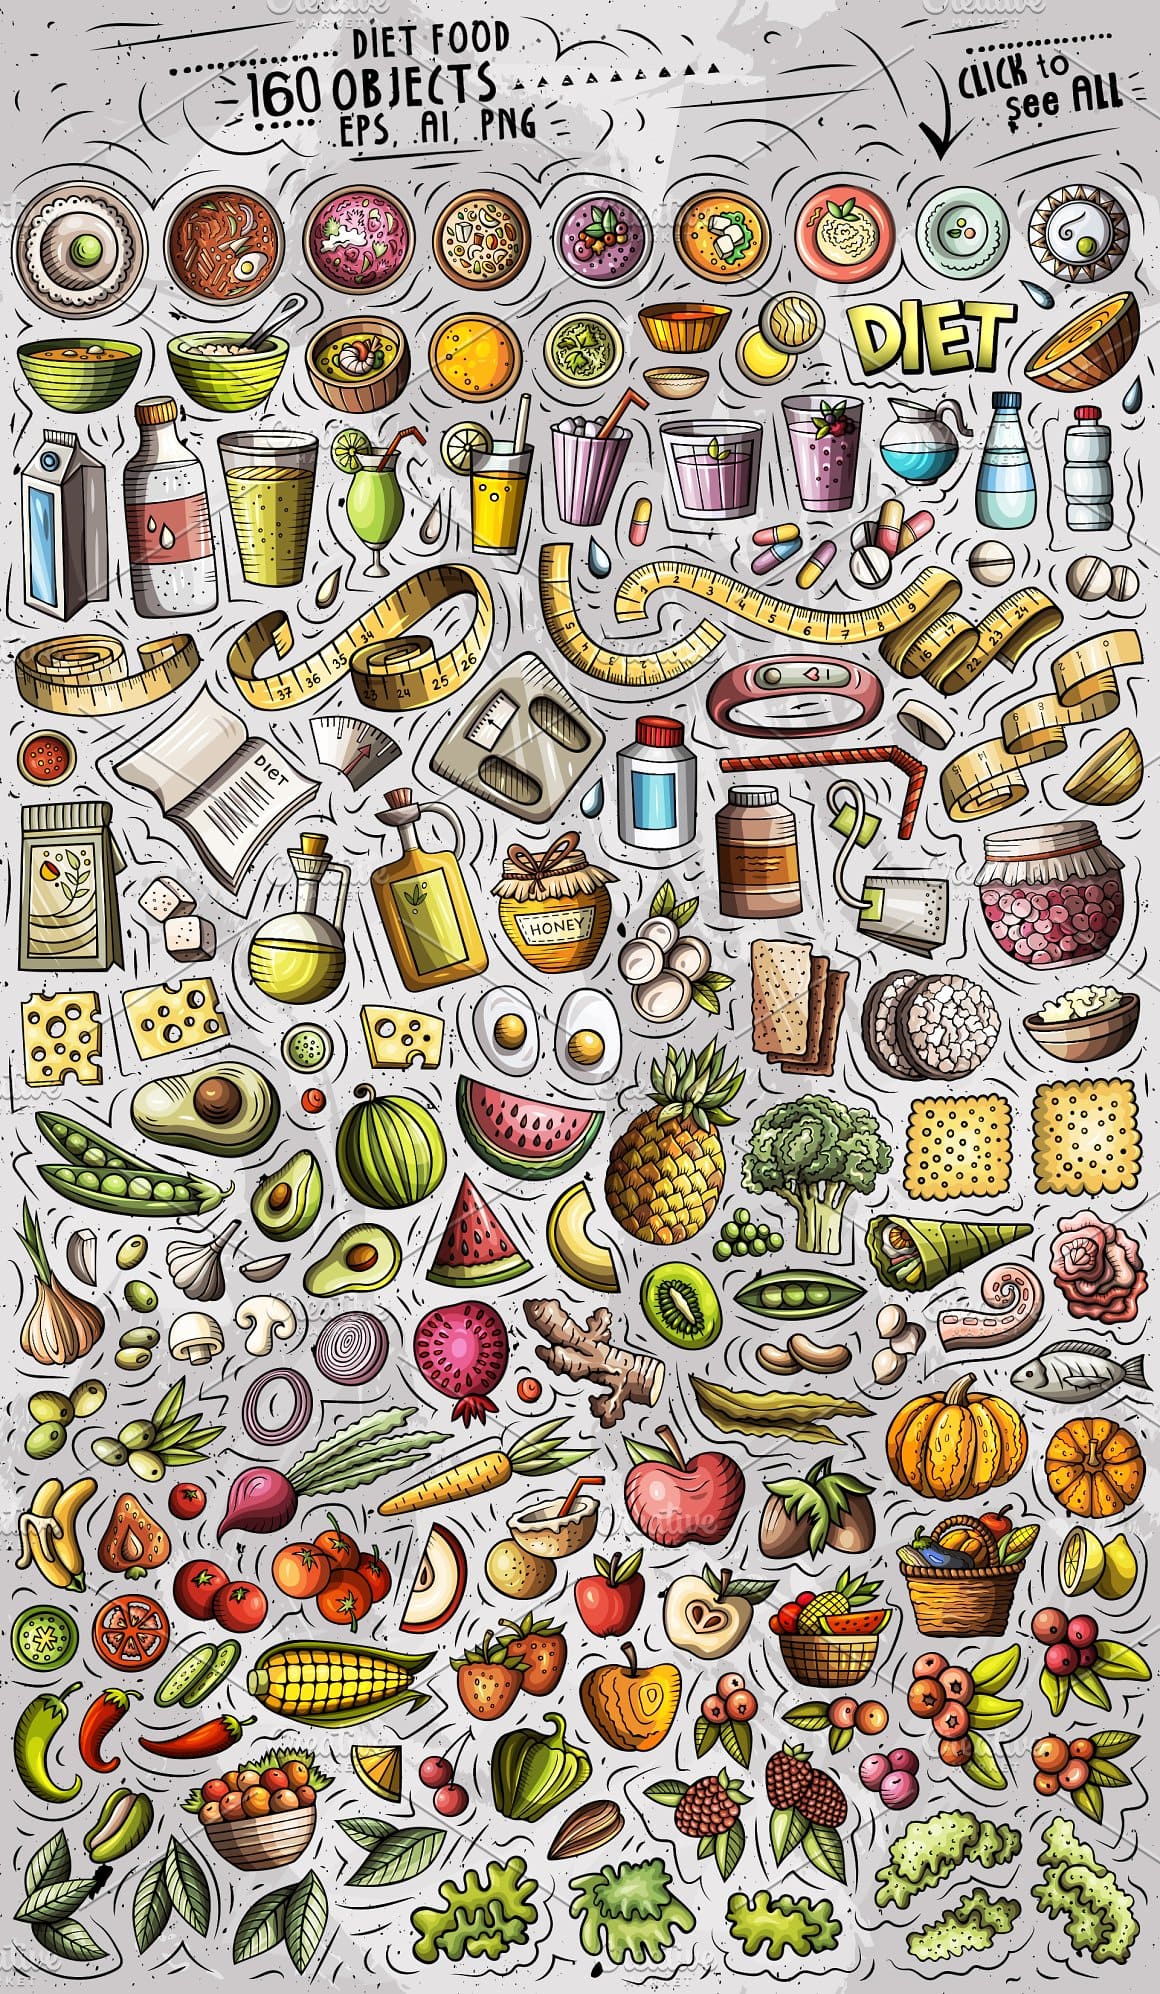 Diet Food Cartoon Vector Objects Set Preview 2.